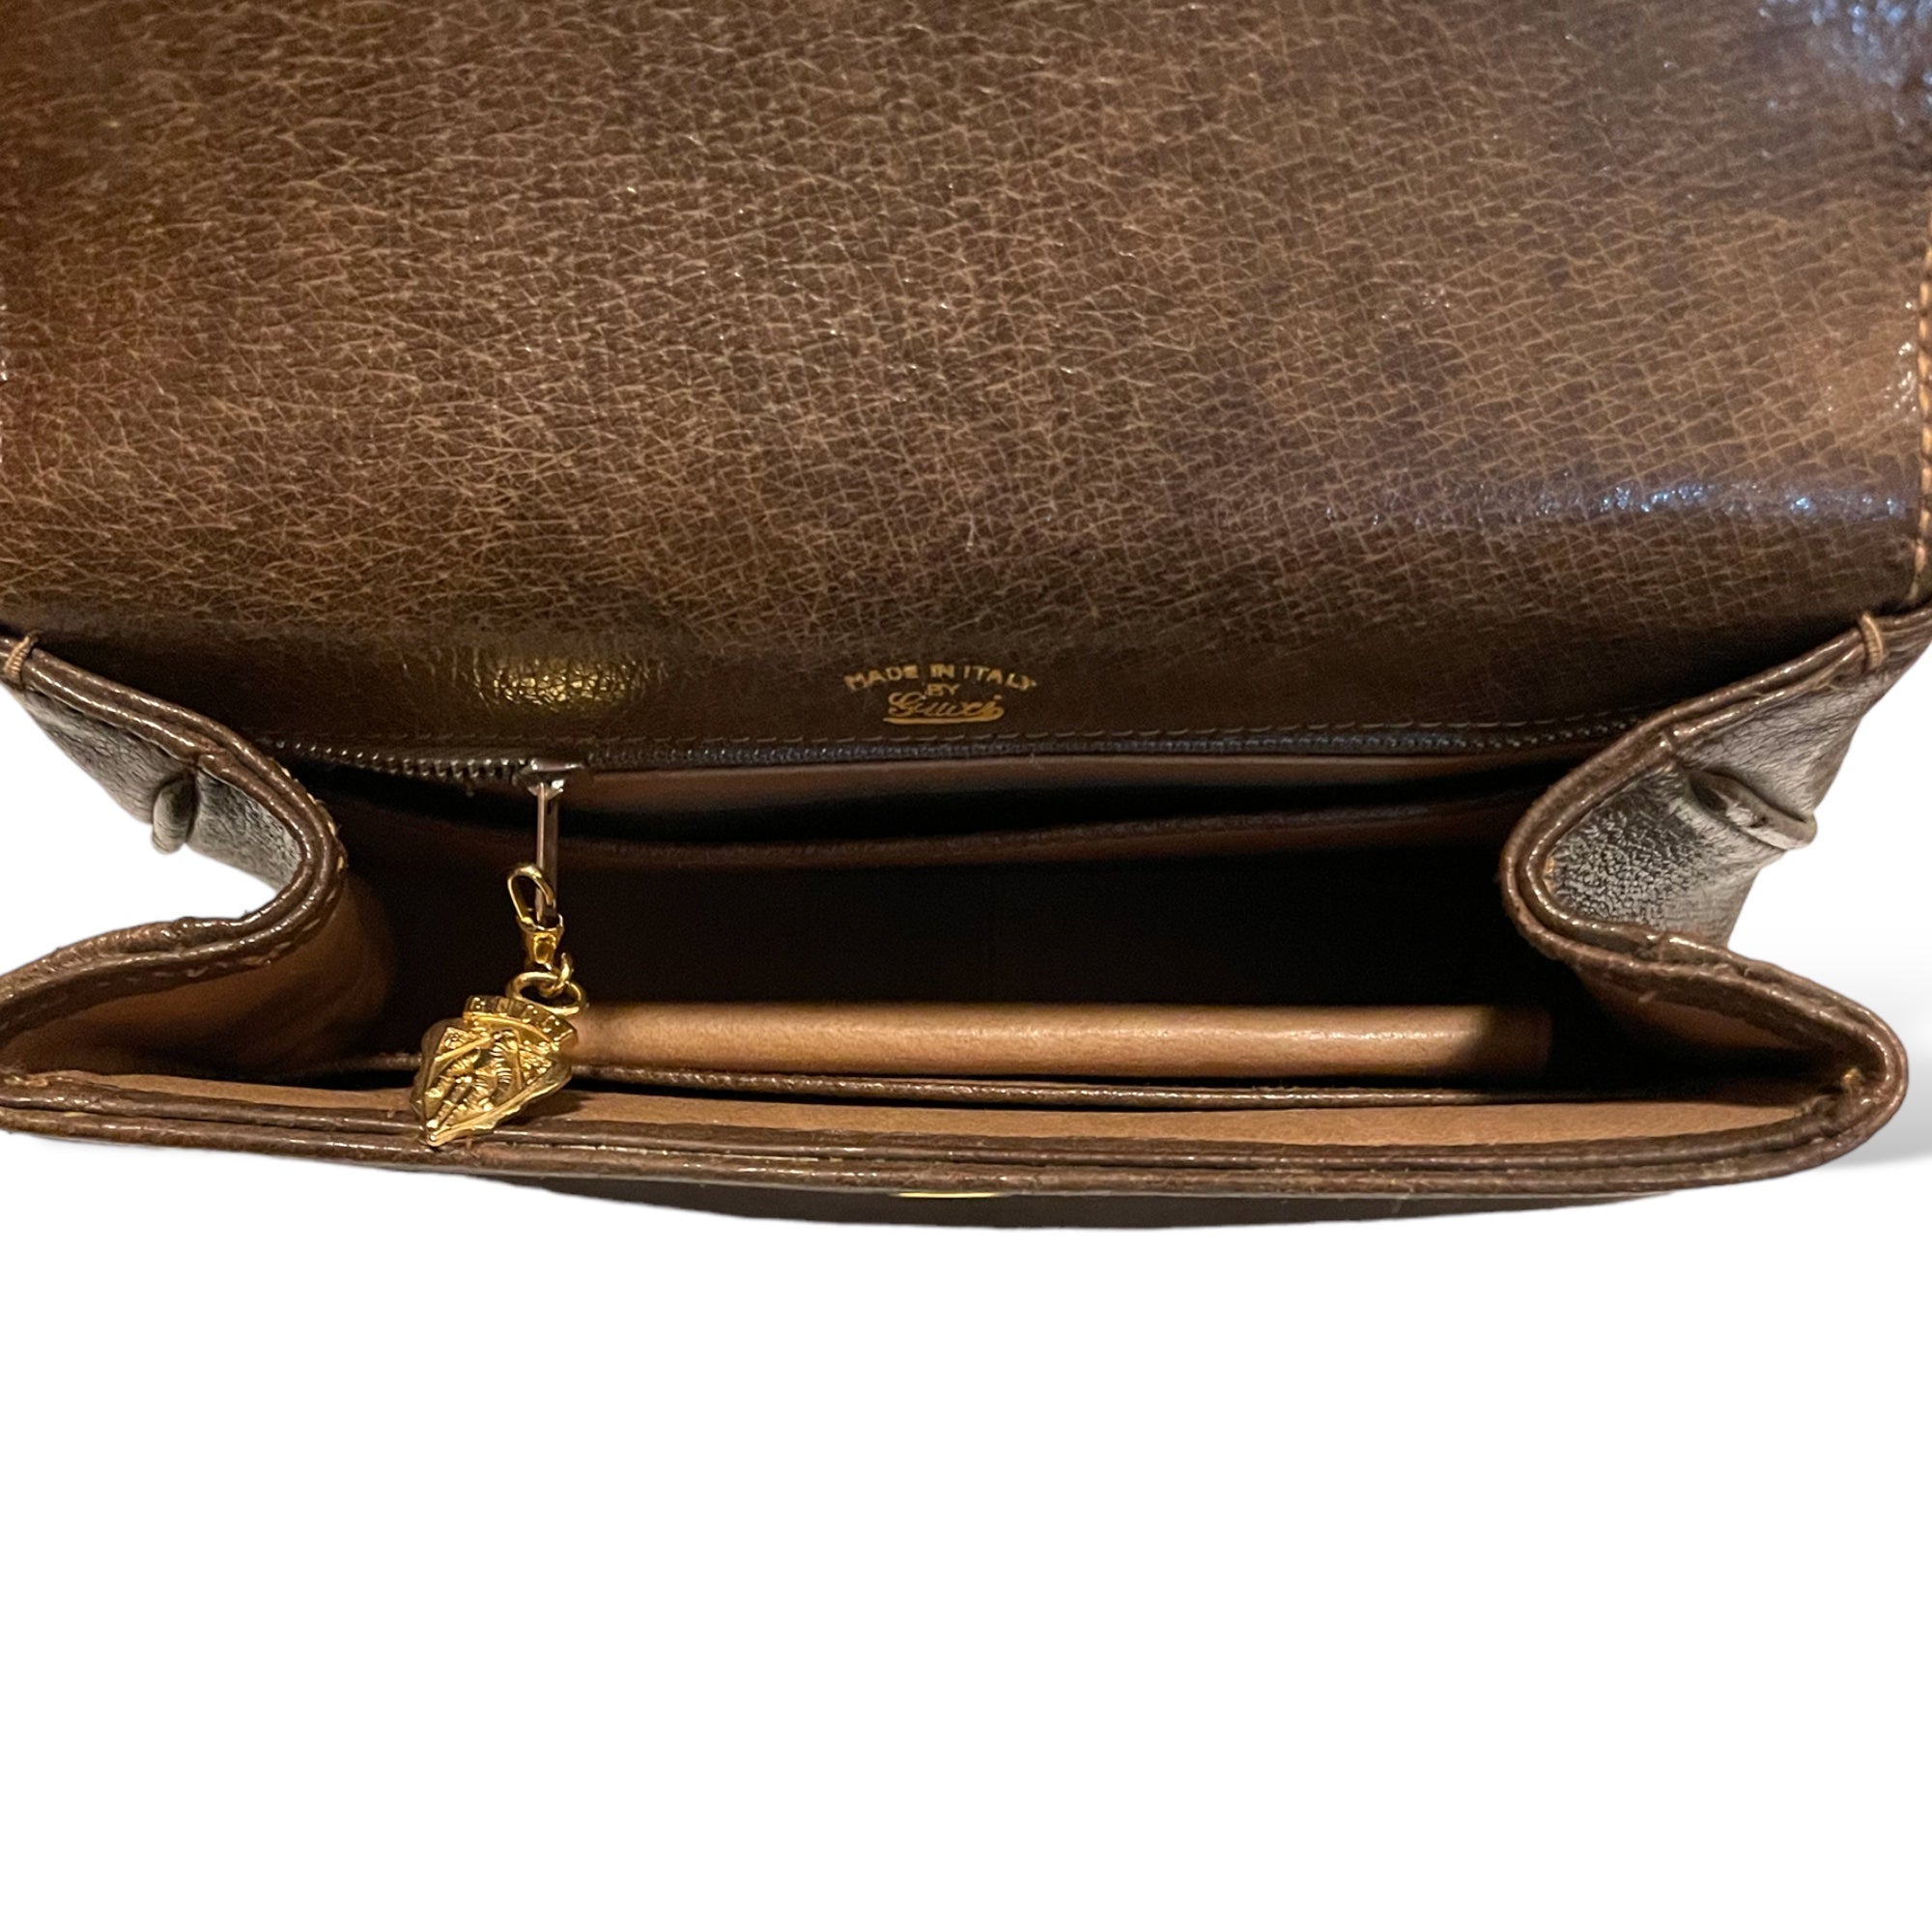 GUCCI 1955 Horsebit Small Shoulder Bag in Brown Leather | COCOON